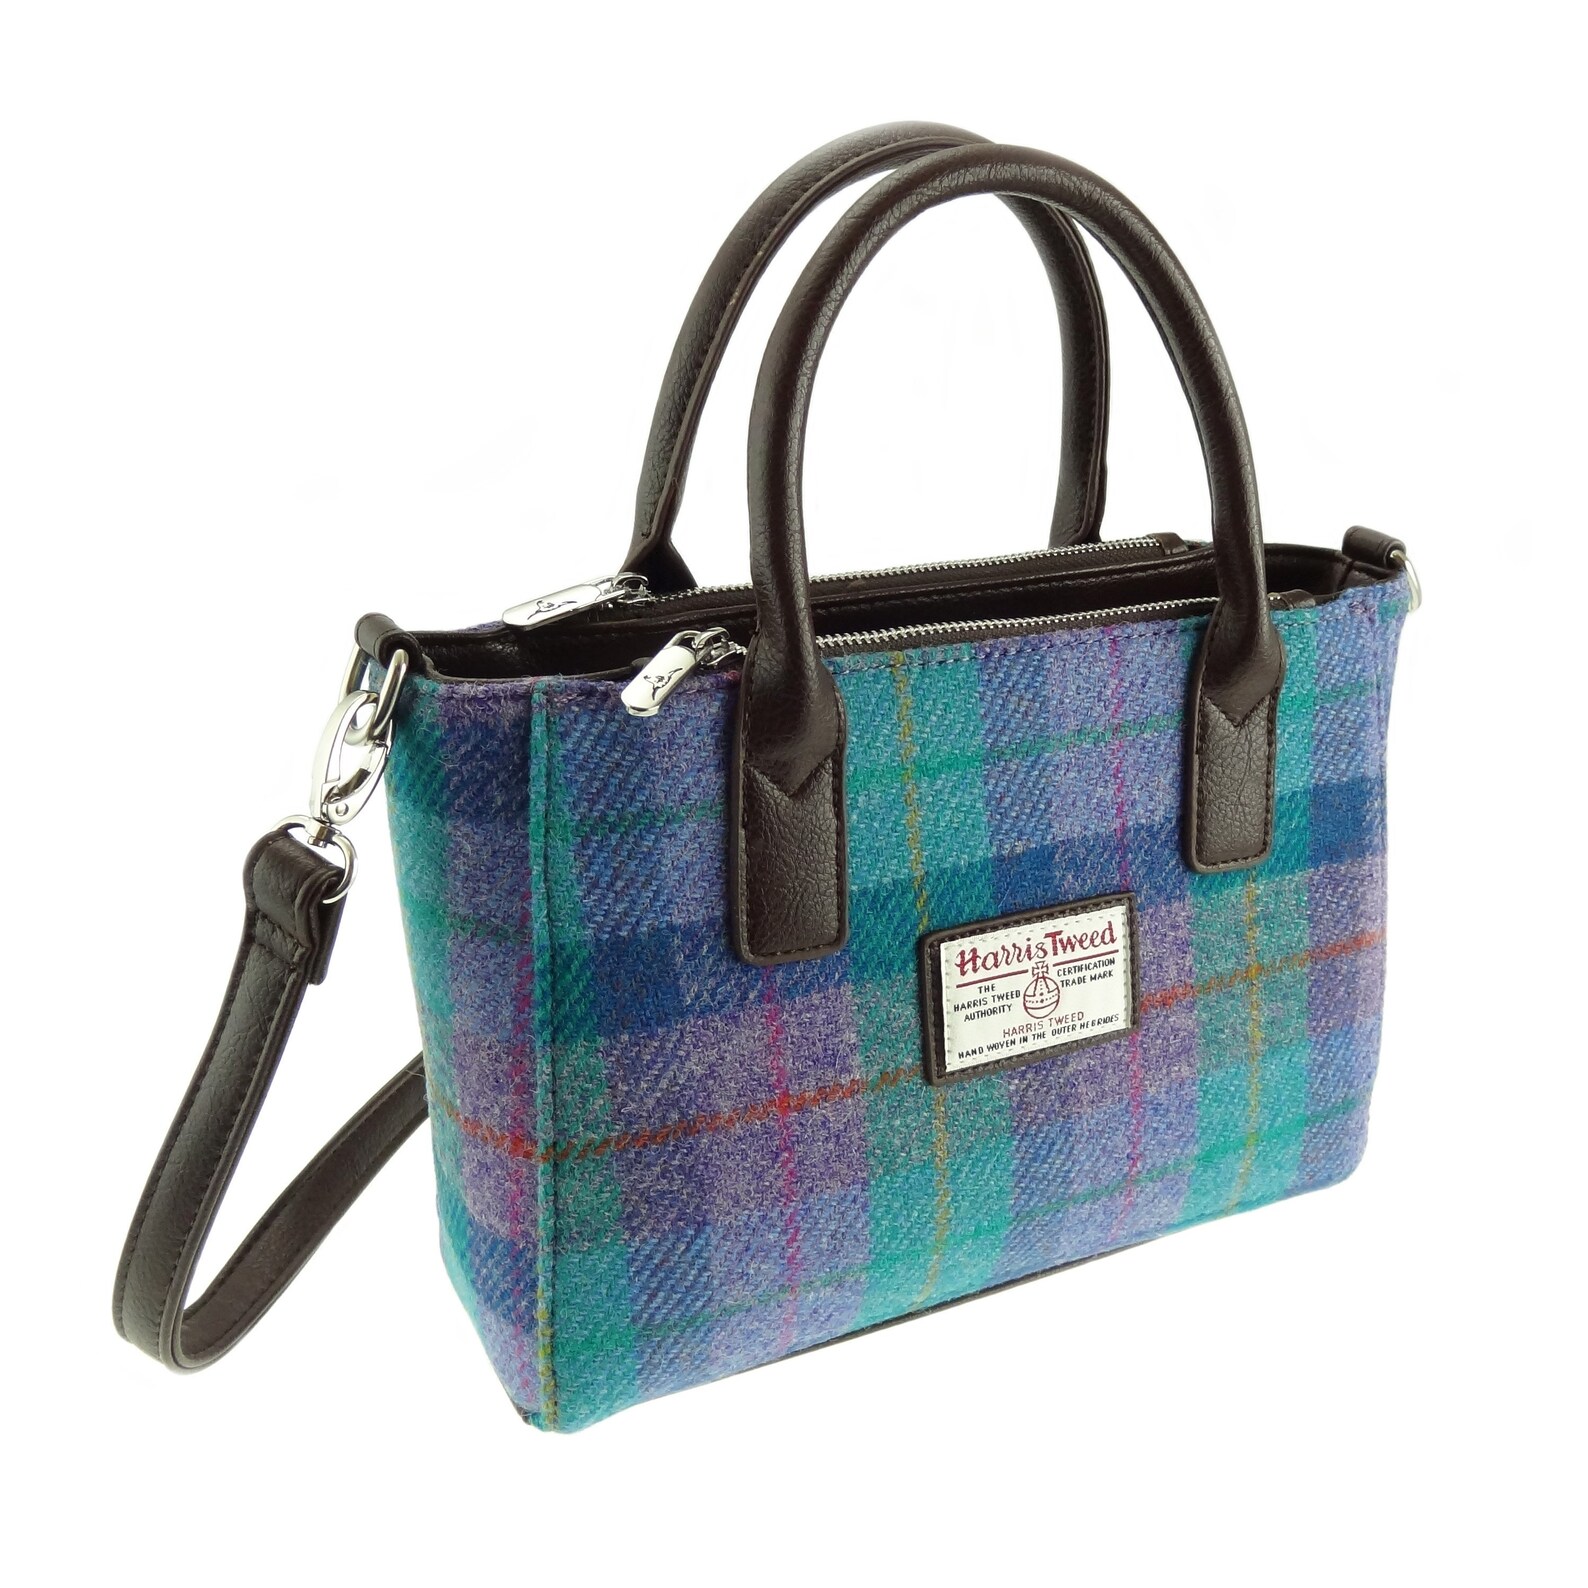 Harris Tweed Small Tote Bag With Shoulder Strap - Etsy